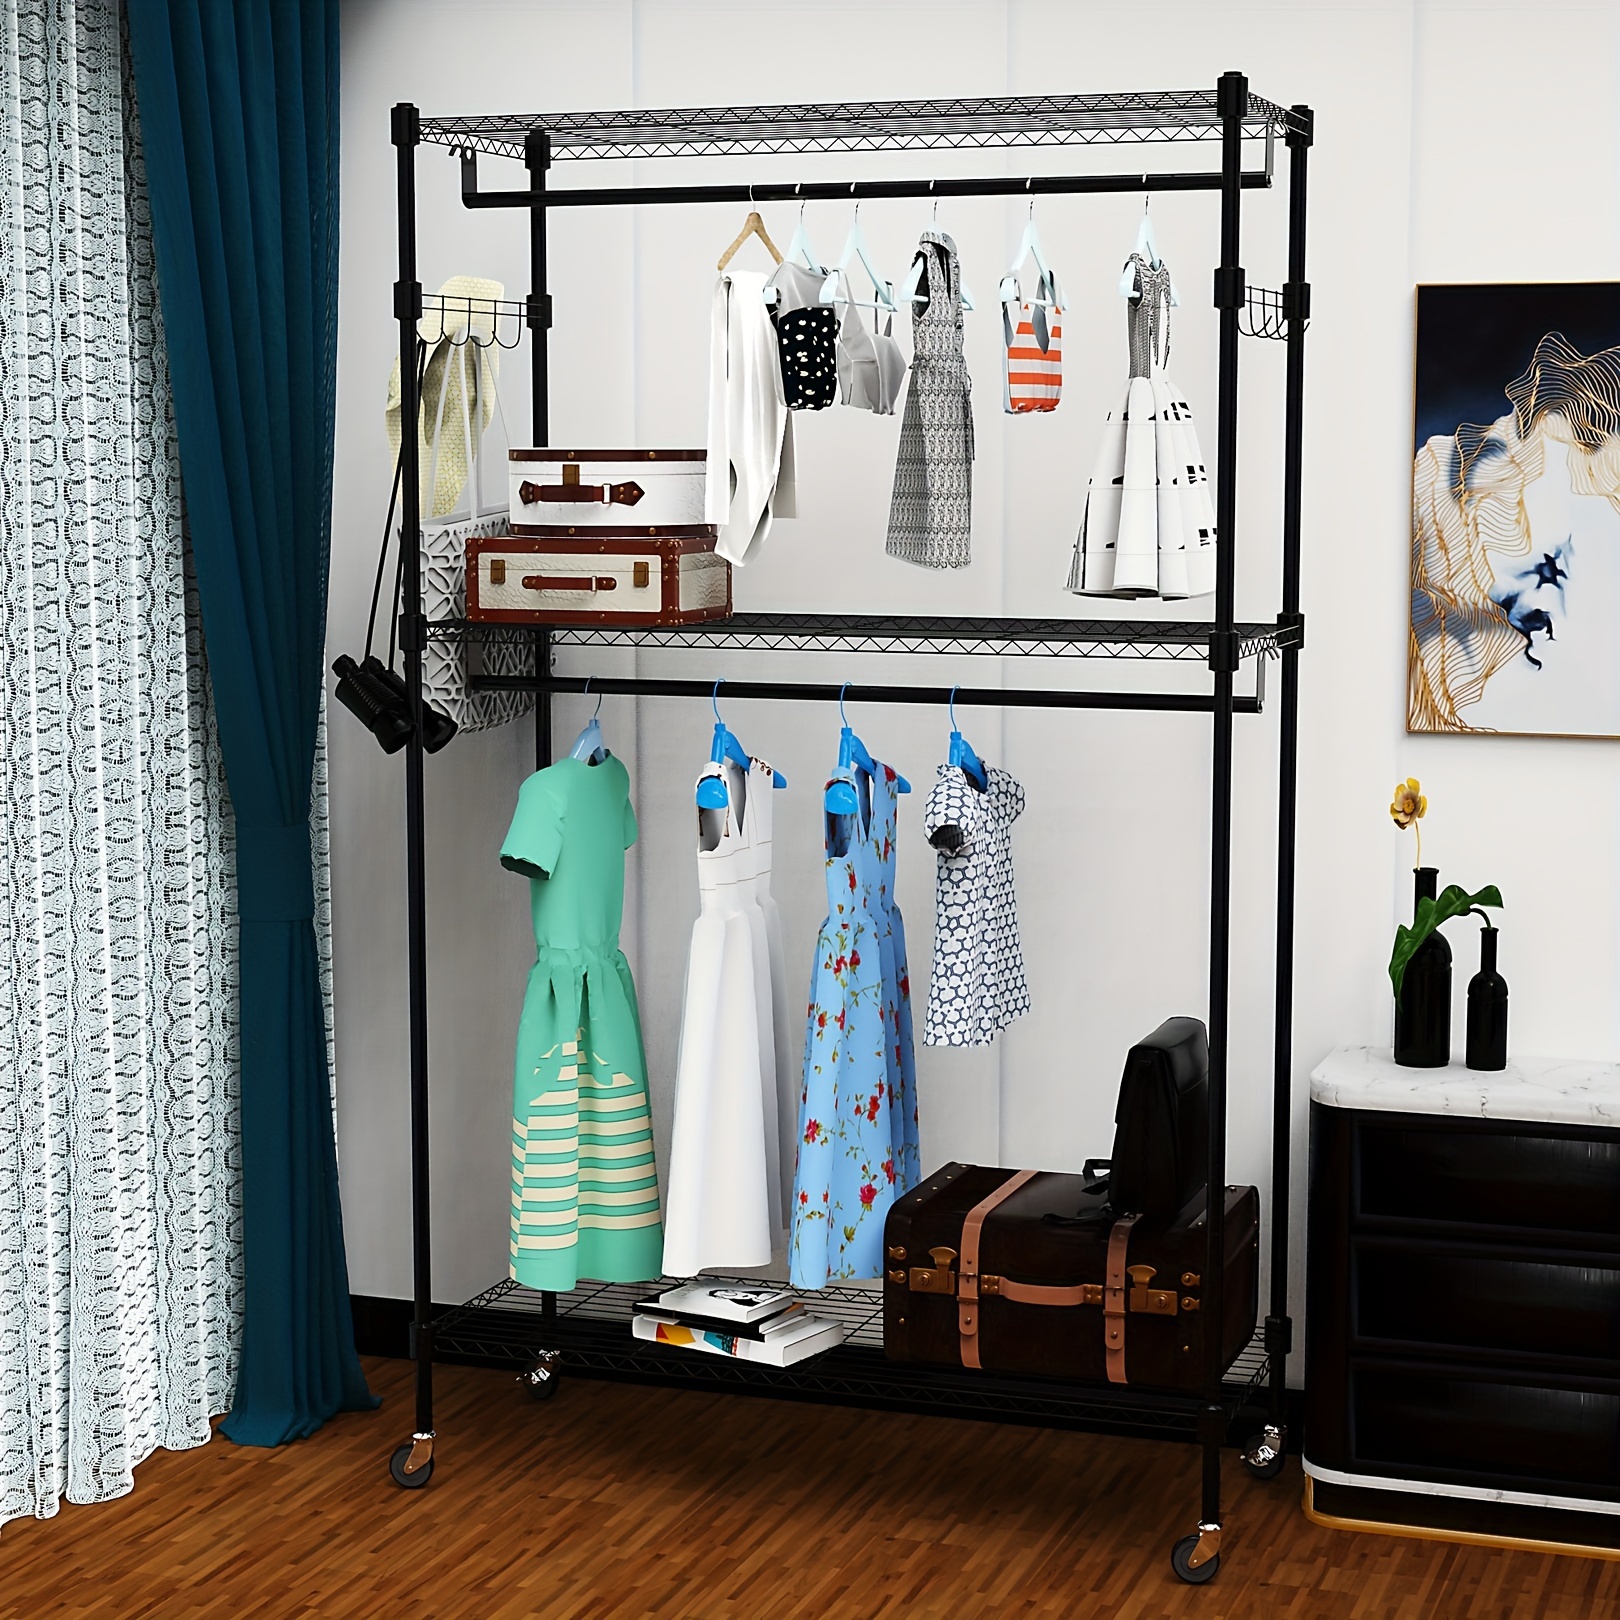 

Heavy Duty Rolling Clothing Rack With 3-tier Storage Shelves, Side Hooks, And 2-inch Wheels, Freestanding Wardrobe For Hanging Clothes